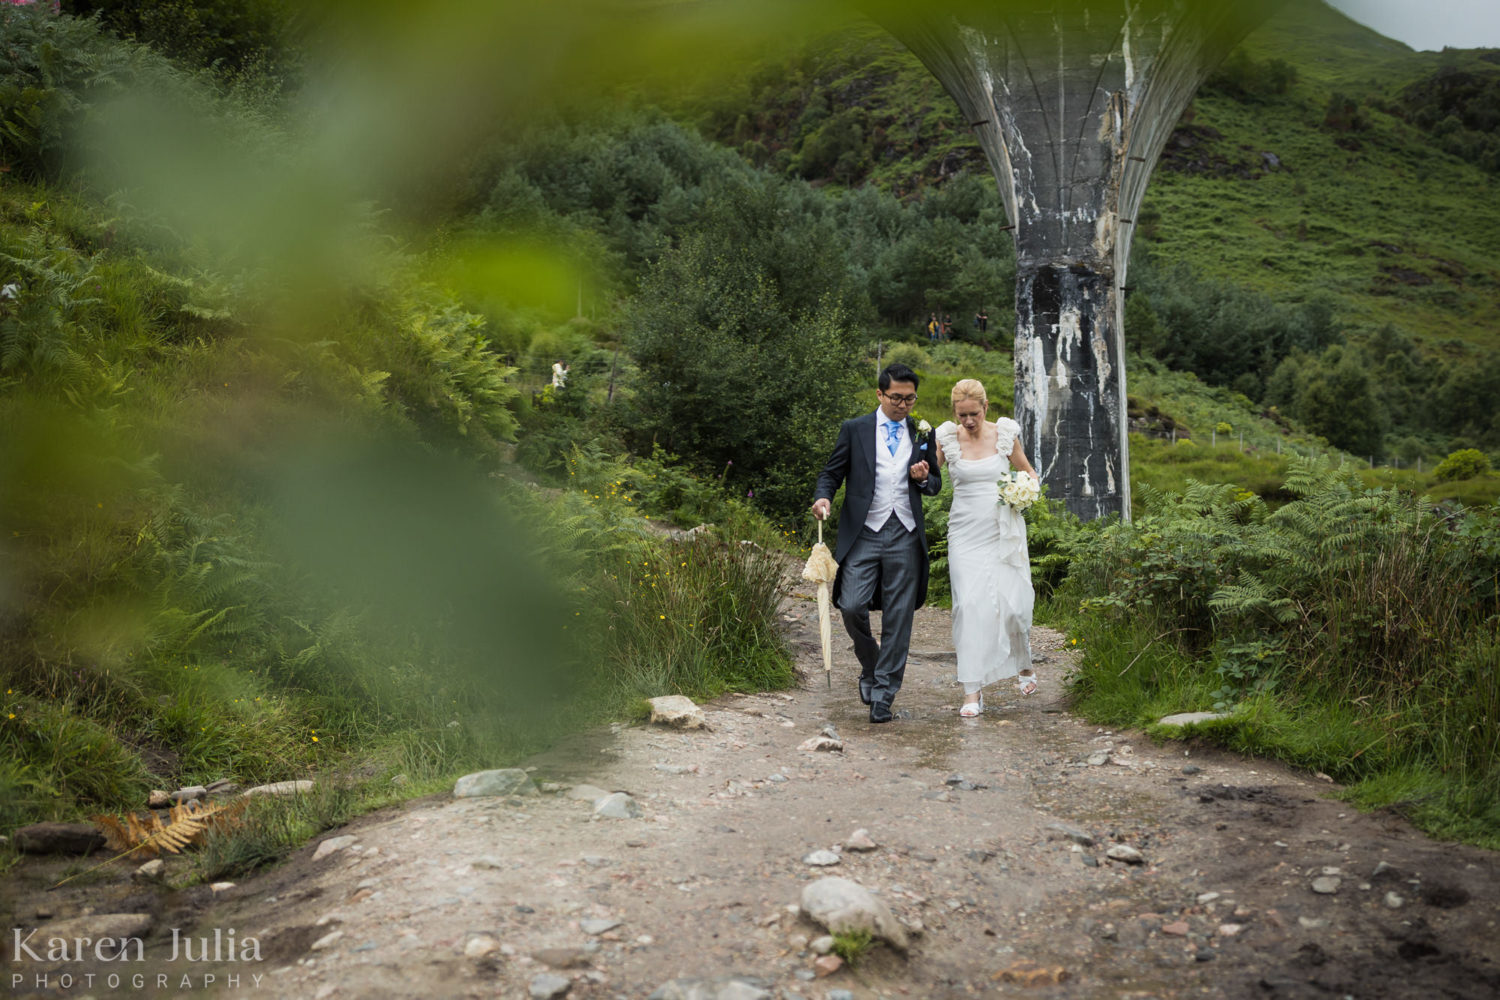 Candid photo of bride and groom walking down from the Glenfinnan Viaduct